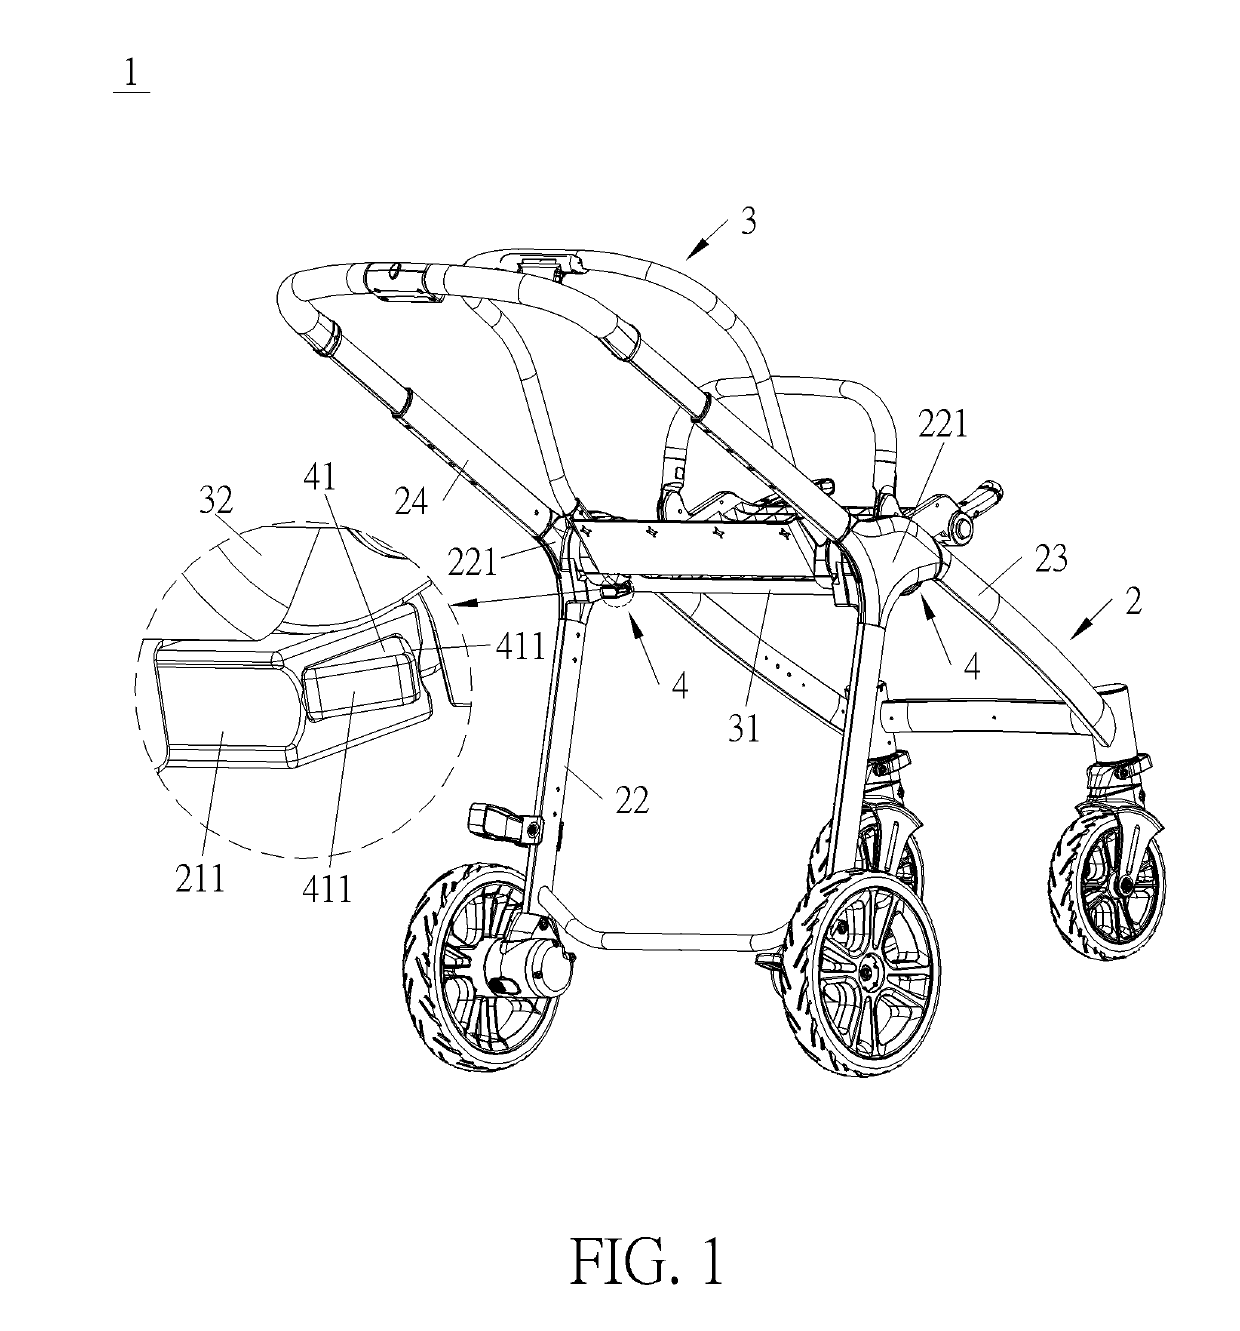 Baby stroller with a folding mechanism triggered by a child carrier